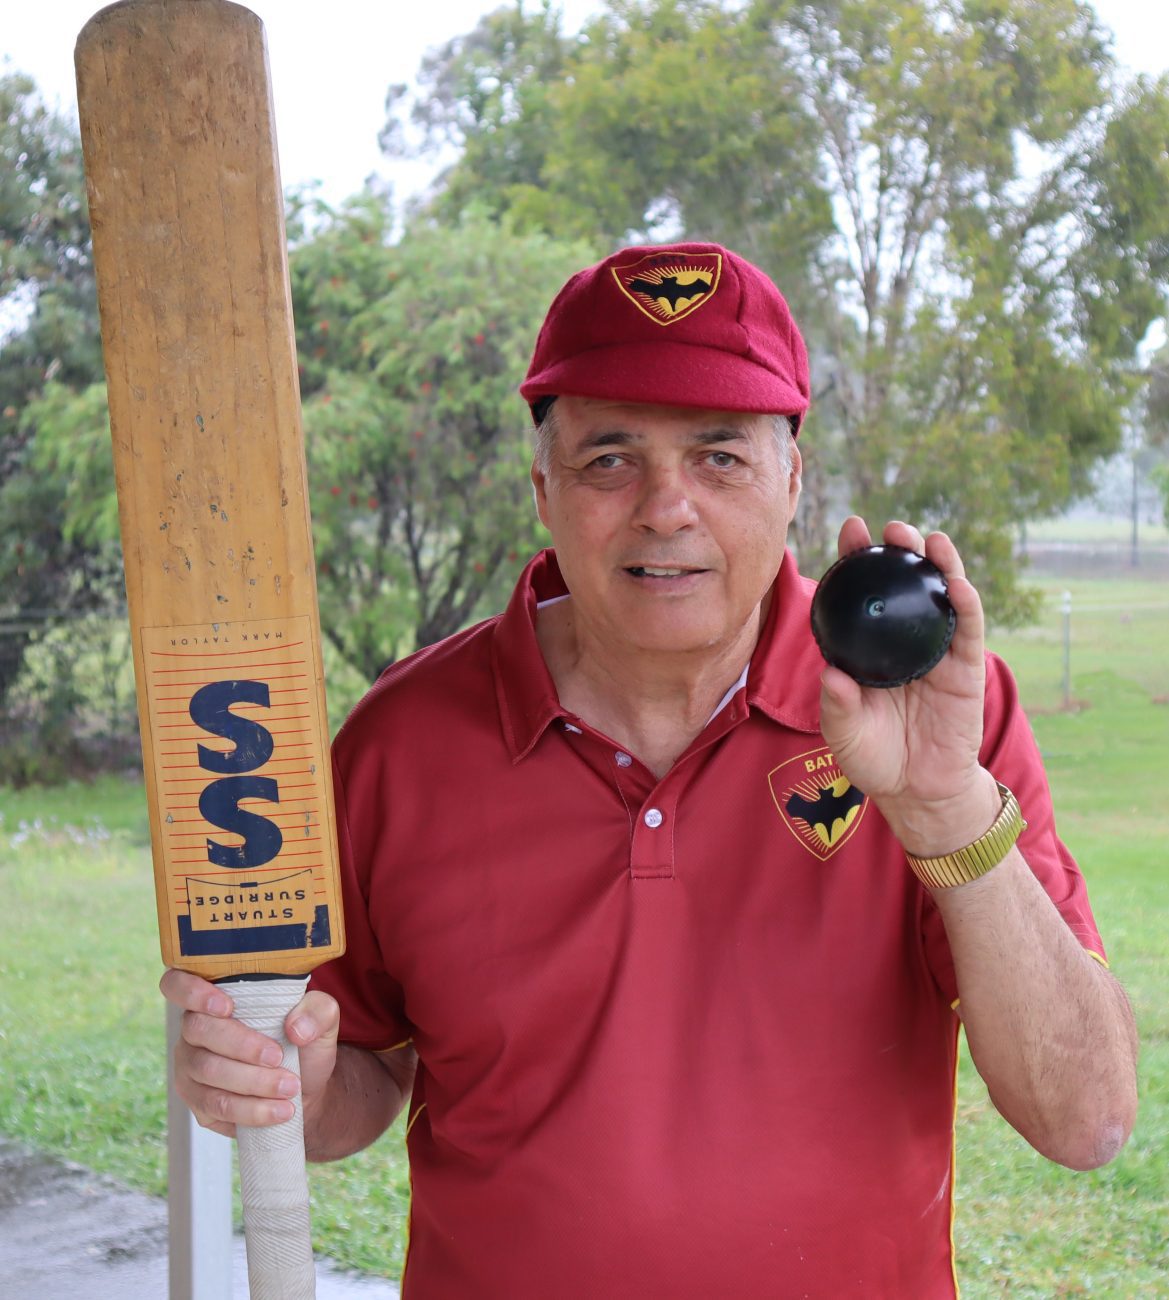 The technology used in our Beep Cricket Ball will be used in a number of ball sports included in the BATS Sports Club's Inclusive Sports Program. At Bats Sports Club, the incoming batter gets to choose the colour of the beeping cricket ball (black or white).